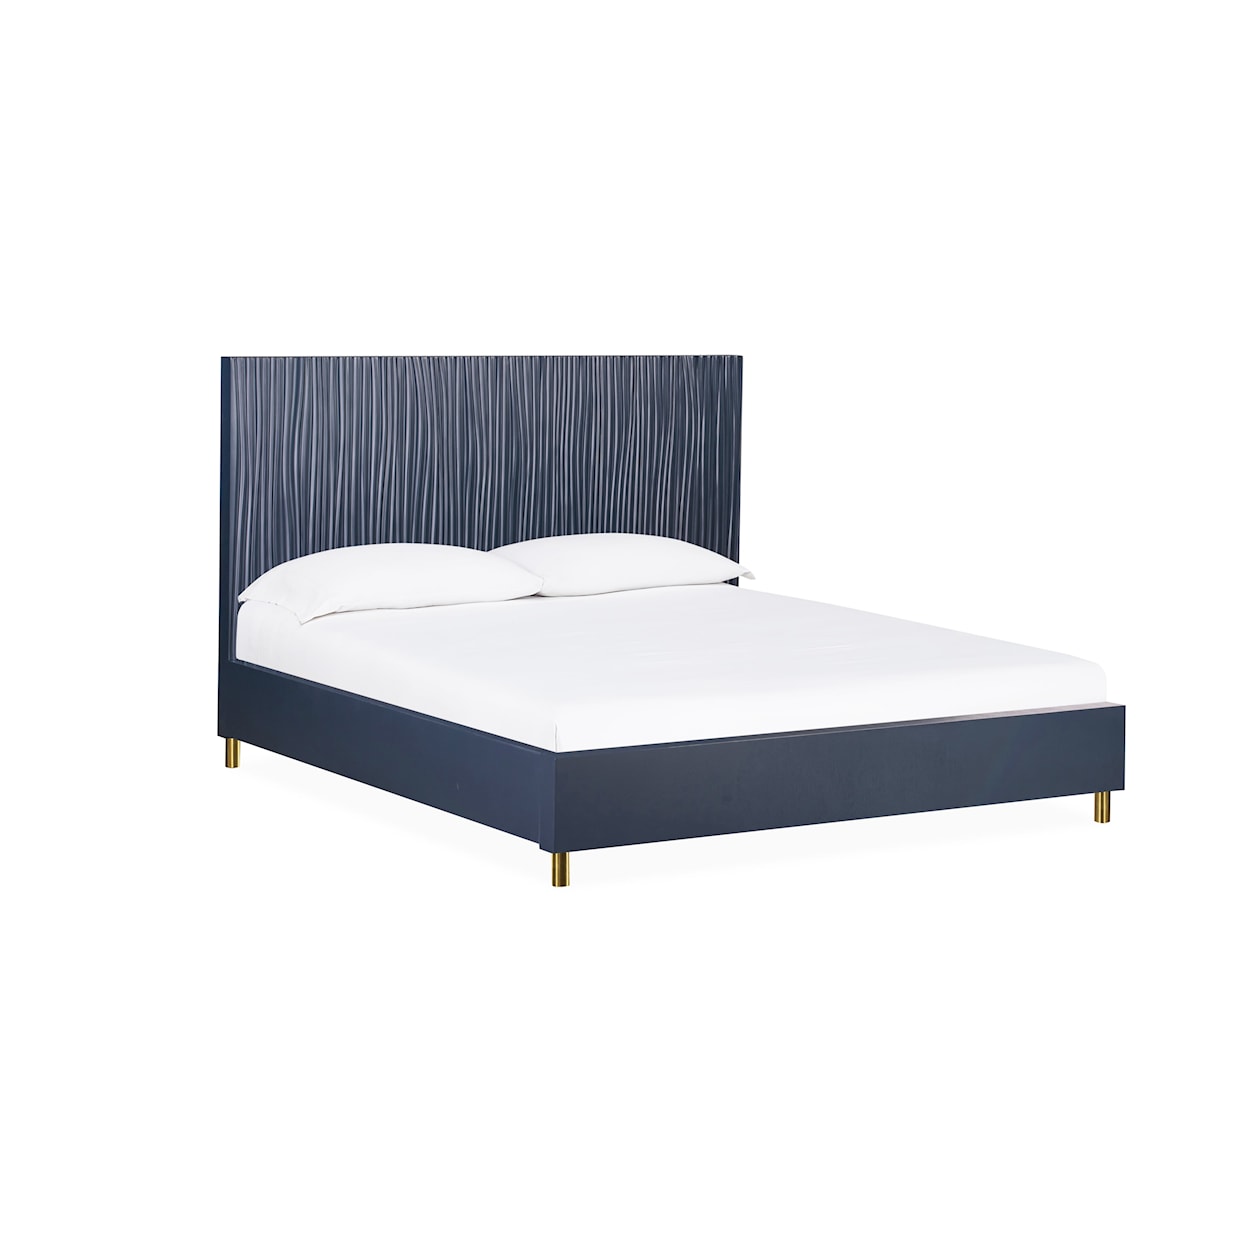 Modus International Argento California King Wave-Patterned Bed